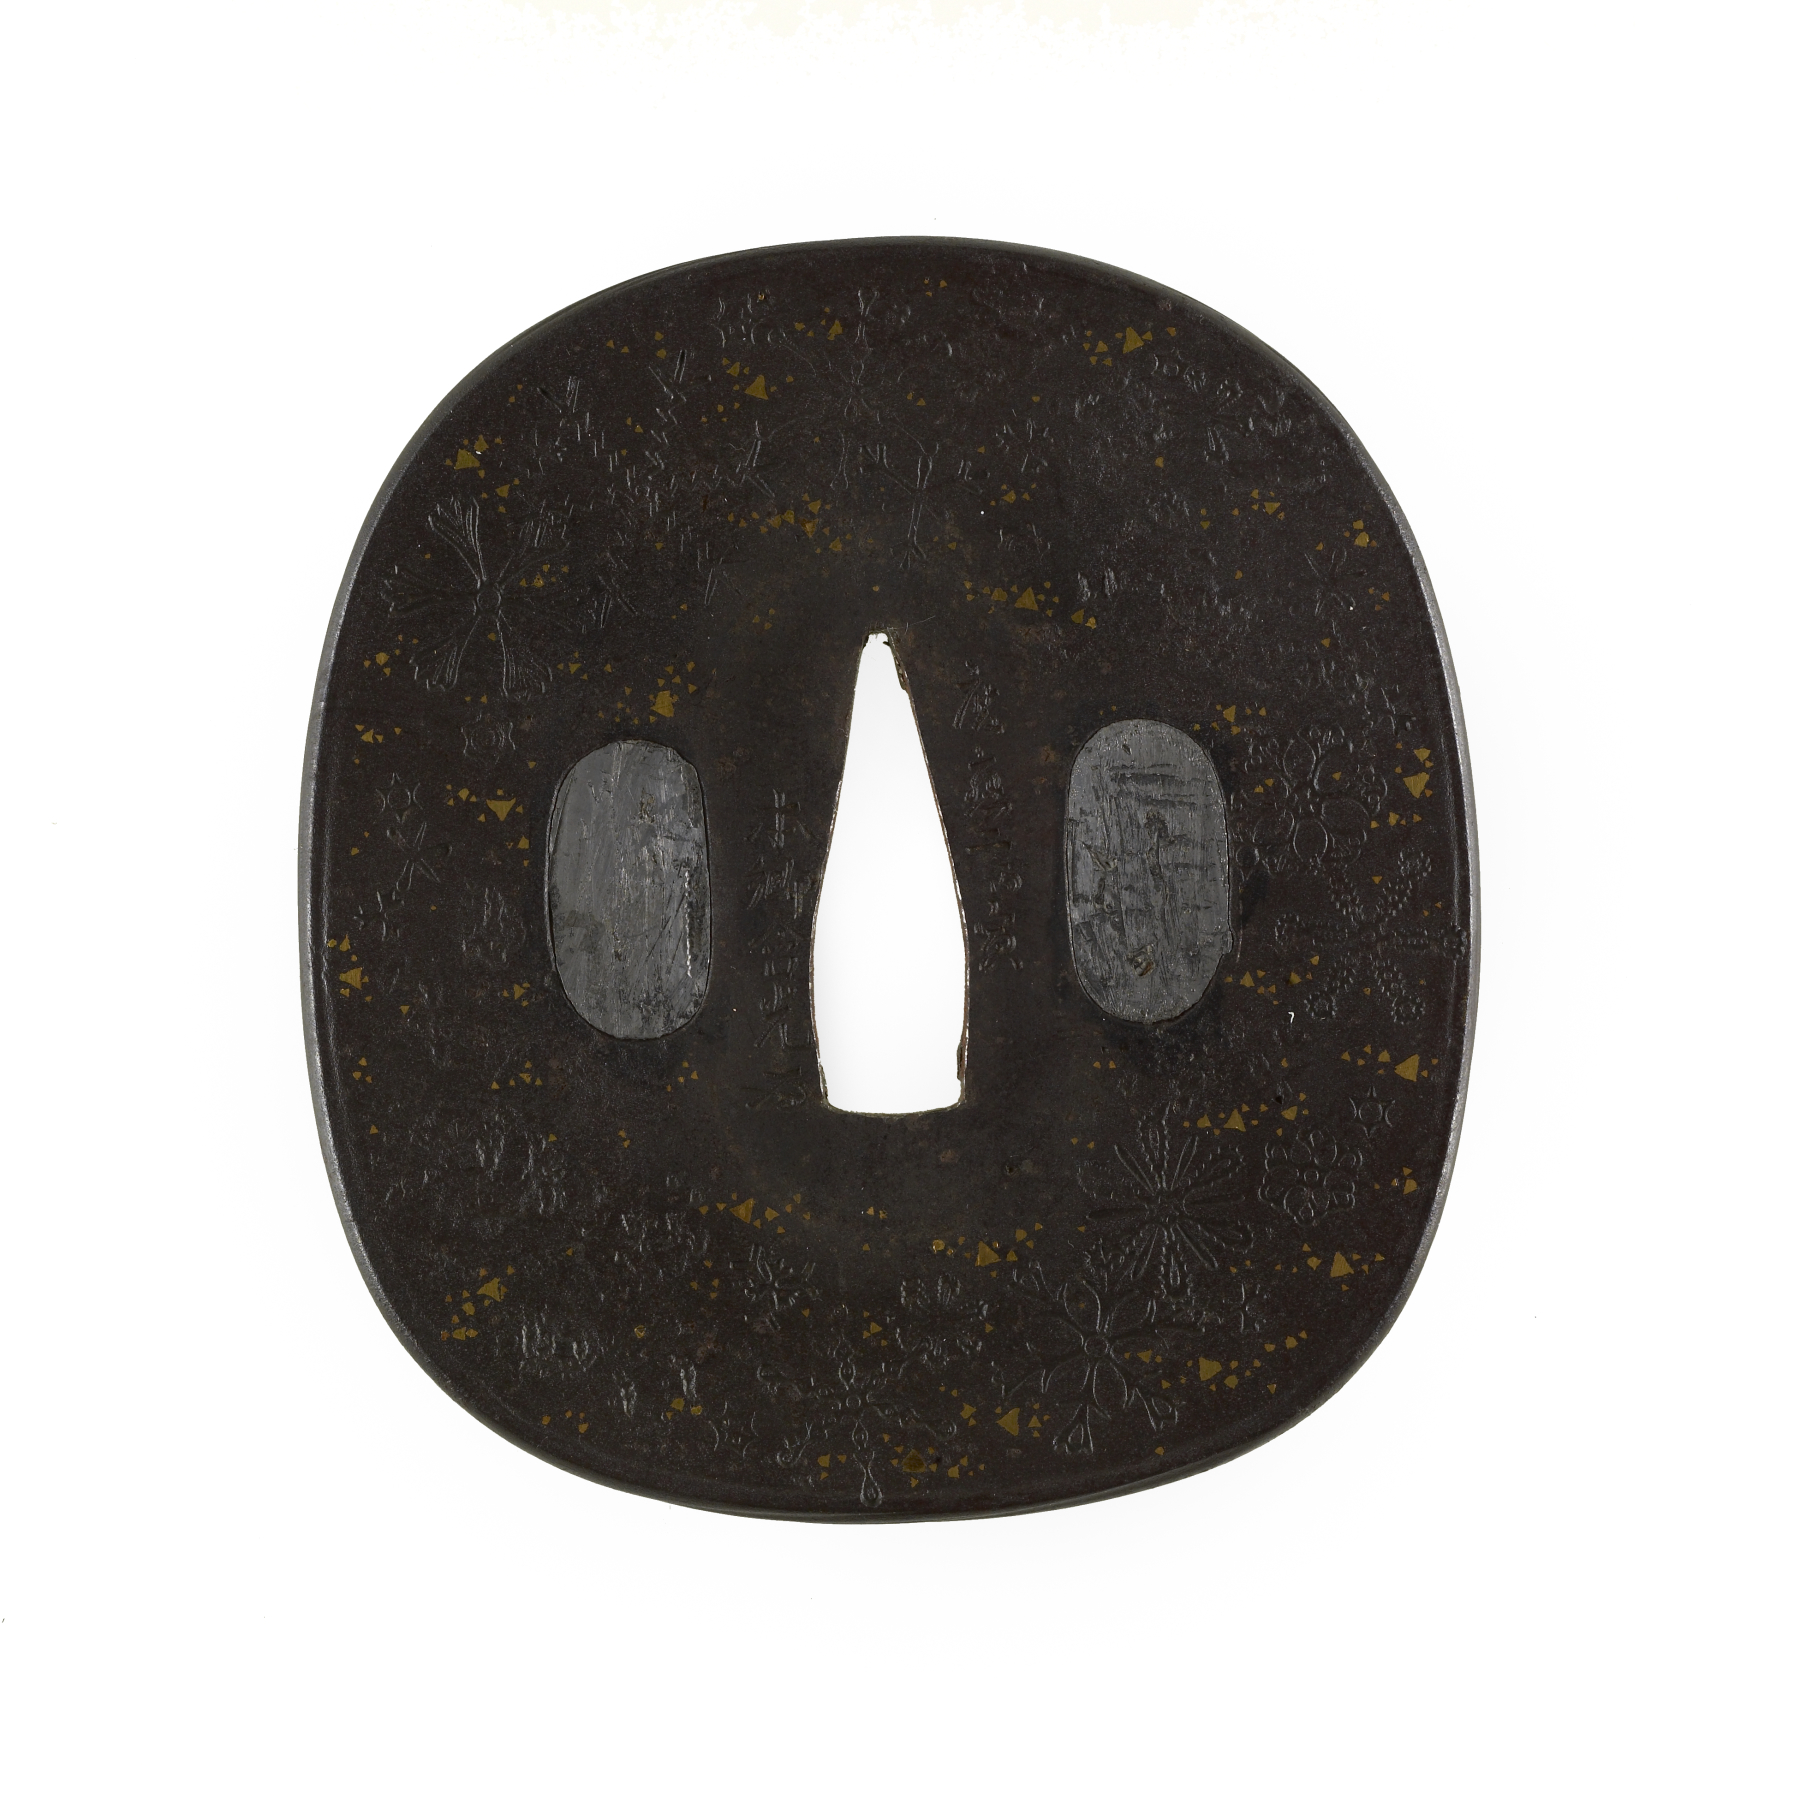 Image for Tsuba with Snowflakes and Poem